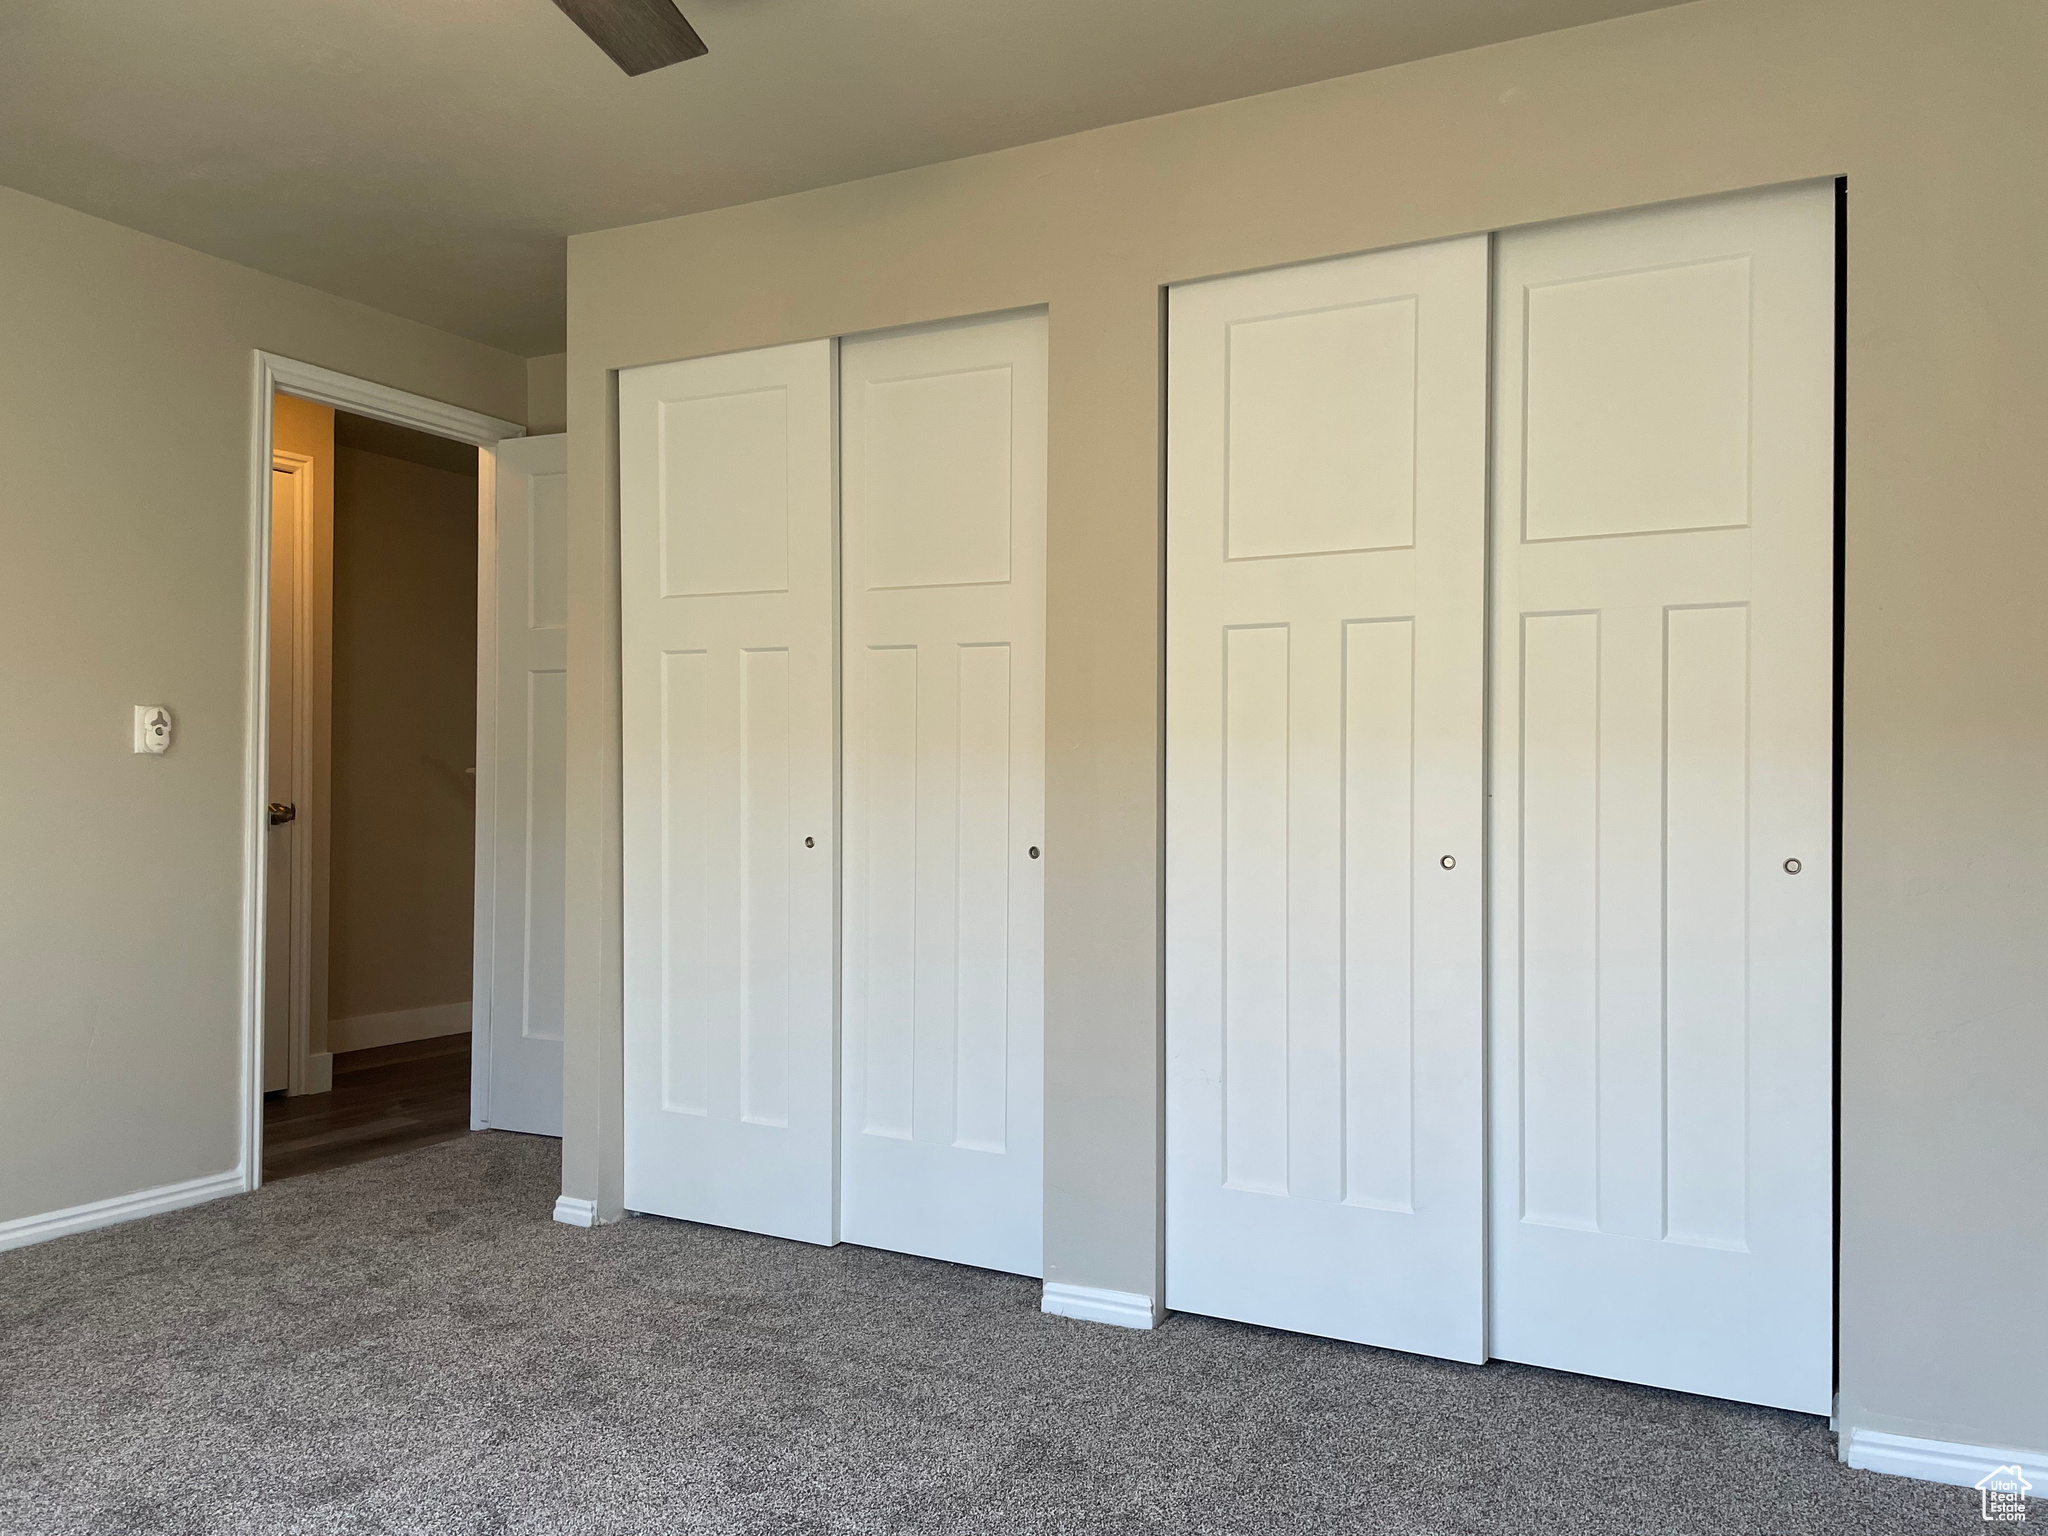 Unfurnished bedroom with multiple closets, dark colored carpet, and ceiling fan